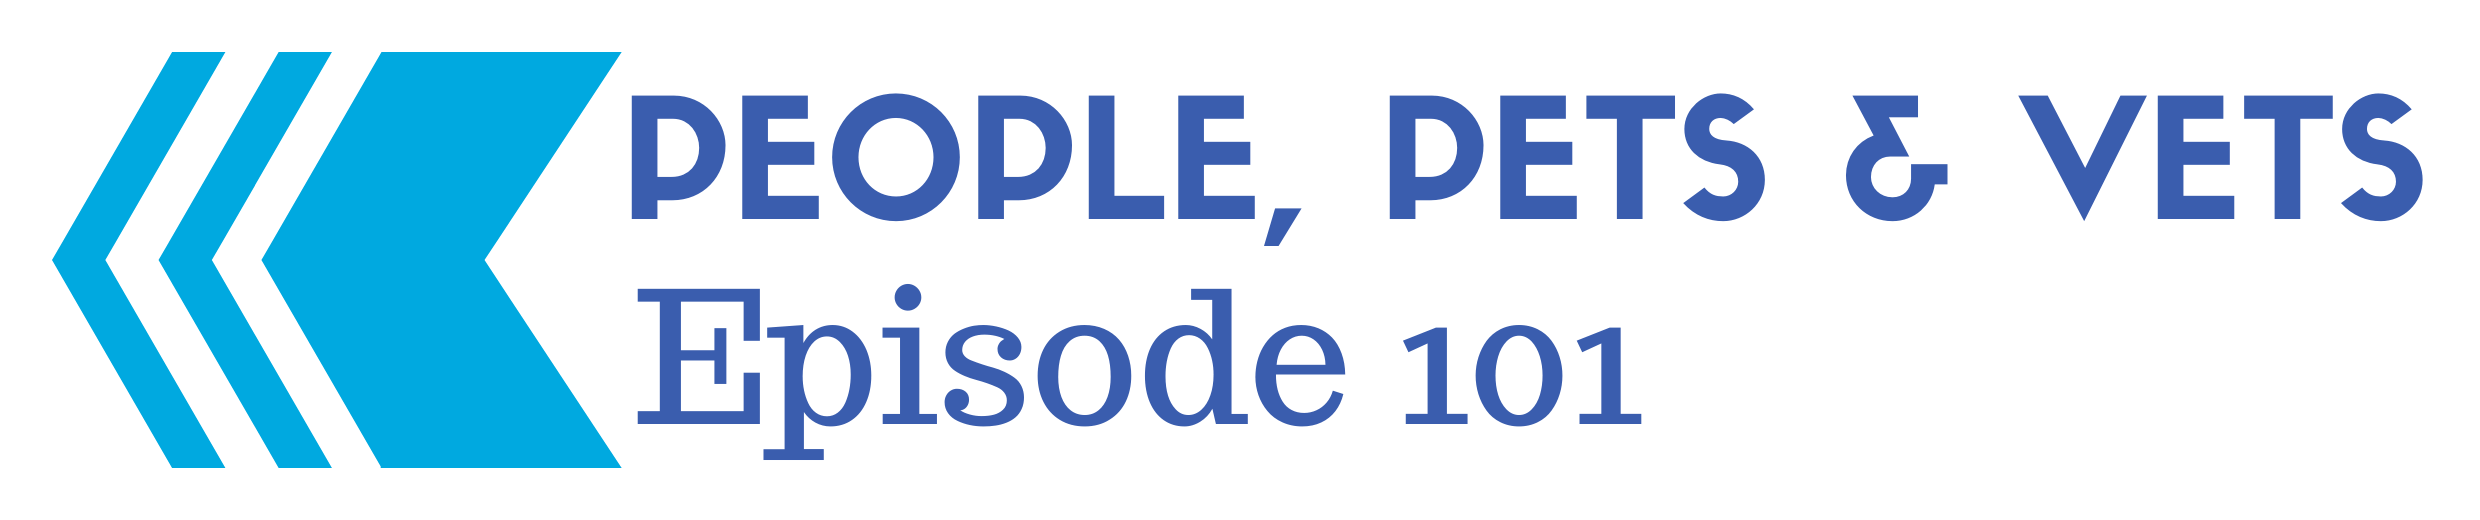 Back to Episode 101